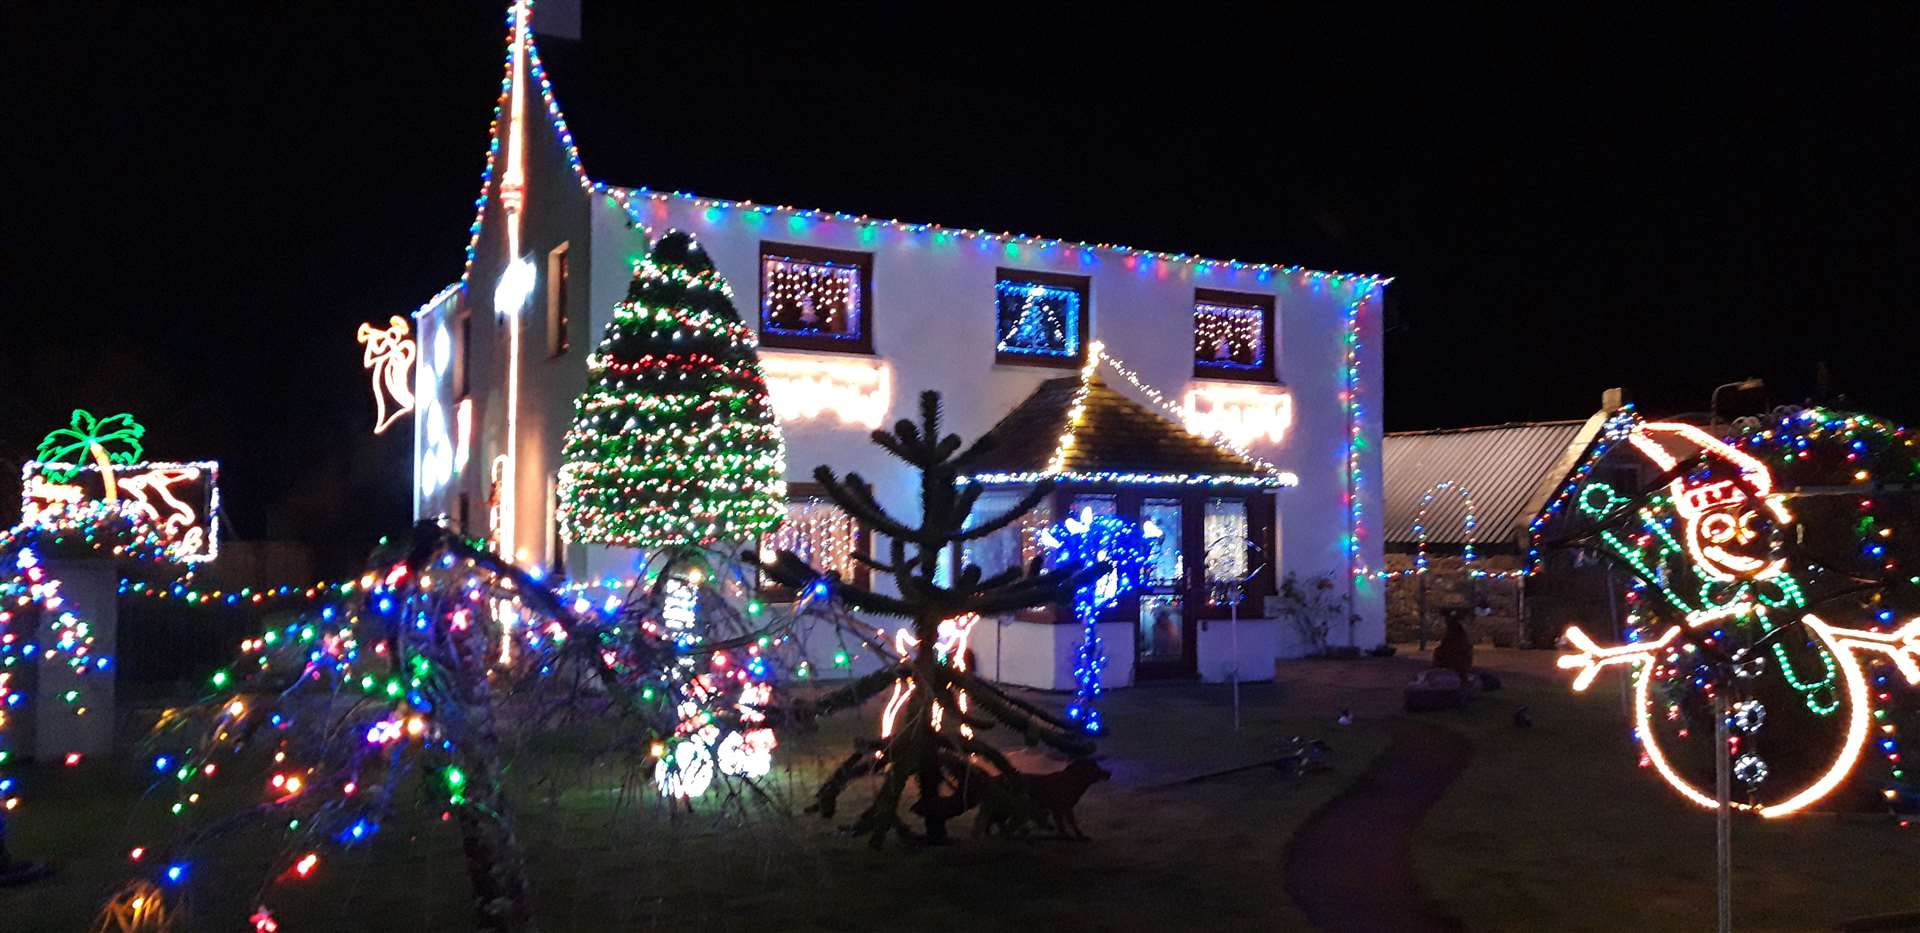 John and Anne Duncan’s Brora home is ablaze with lights during the festive season.